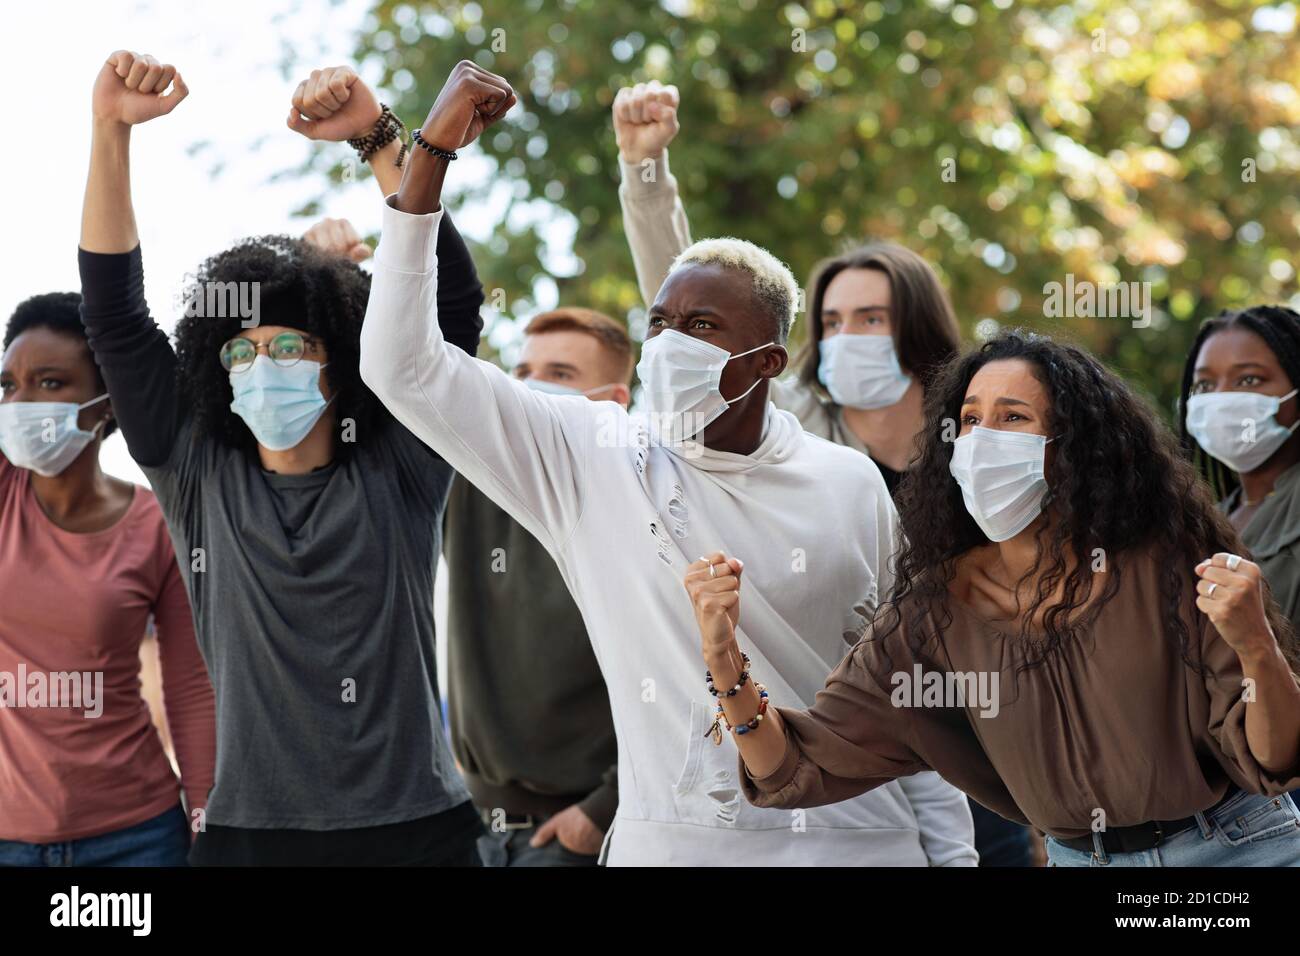 International group of angry students protesting against racism Stock Photo